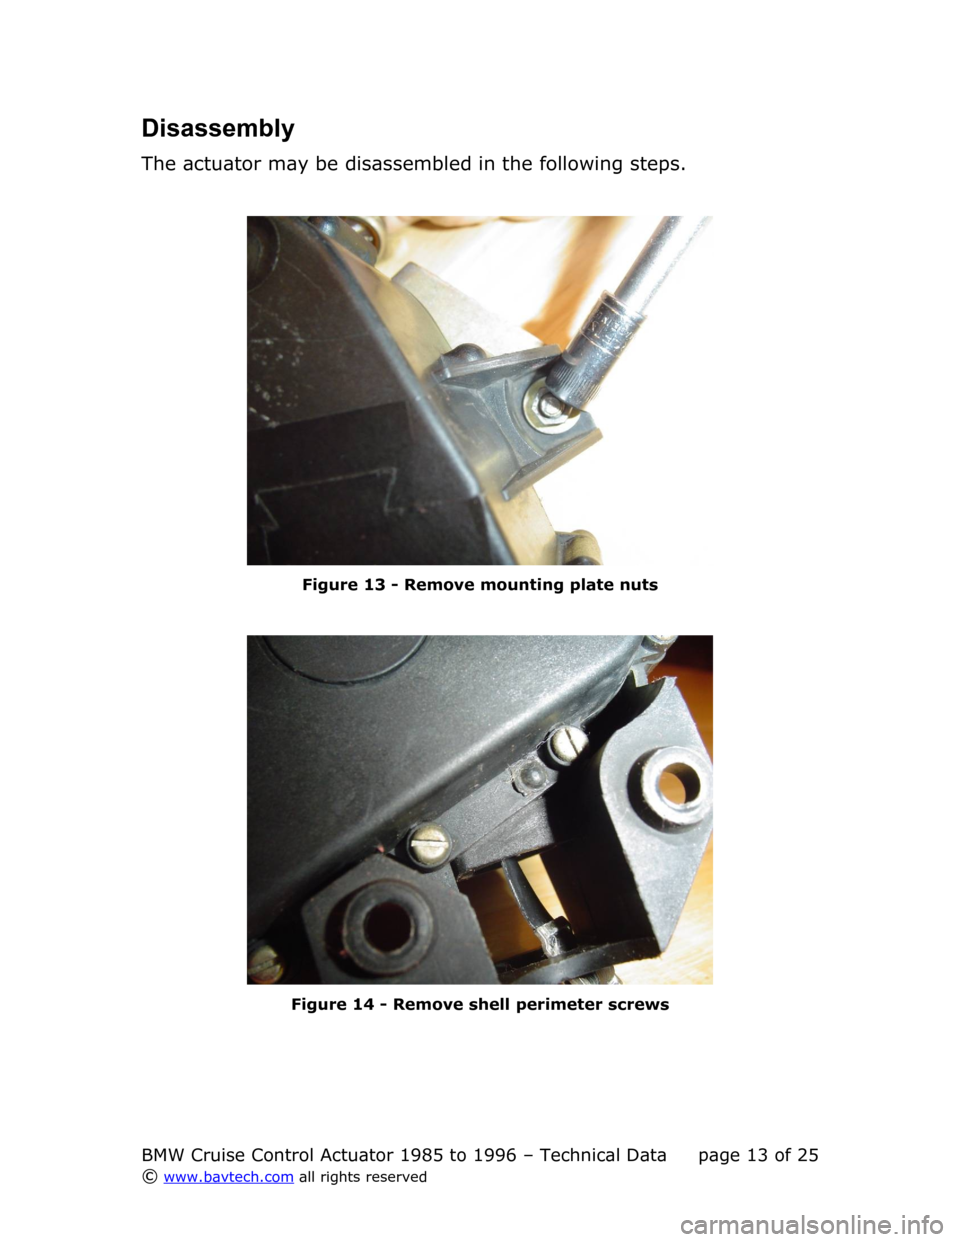 BMW 3 SERIES 1991 E36 Cruise Control Acutator Disassembly
The actuator may be disassembled in the following steps.
Figure  13  - Remove mounting plate nuts
Figure  14  - Remove shell perimeter screws
BMW Cruise Control Actuator 1985 to 1996 – T